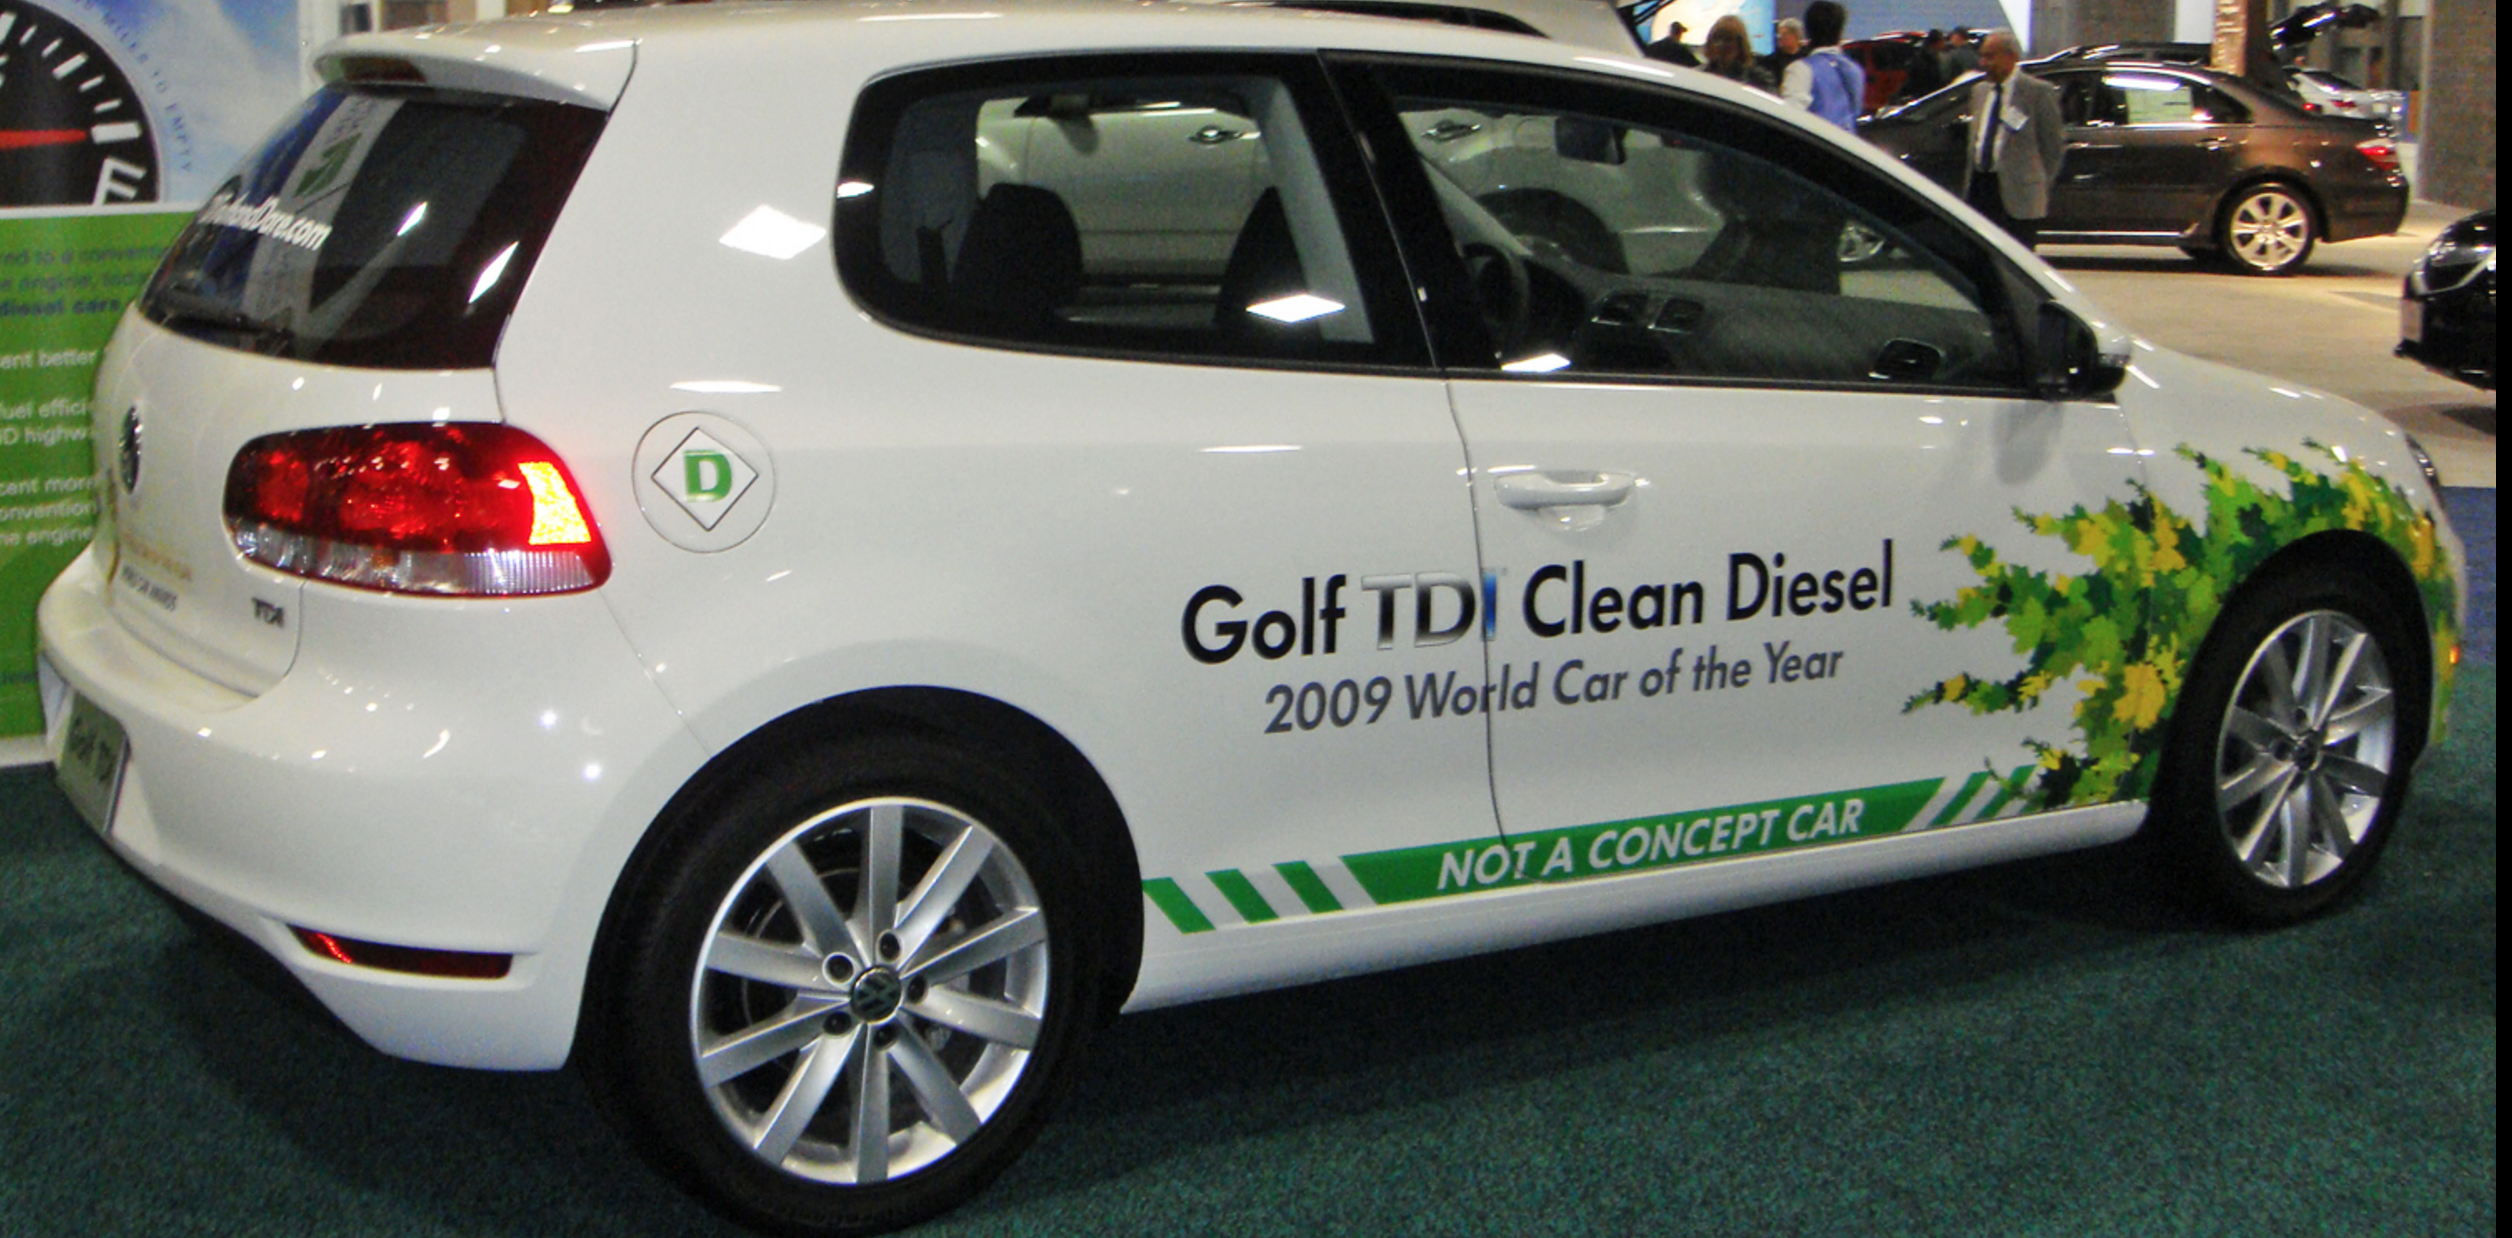 2010 VW Golf TDI with defeat device displaying "Clean Diesel" at a US auto show